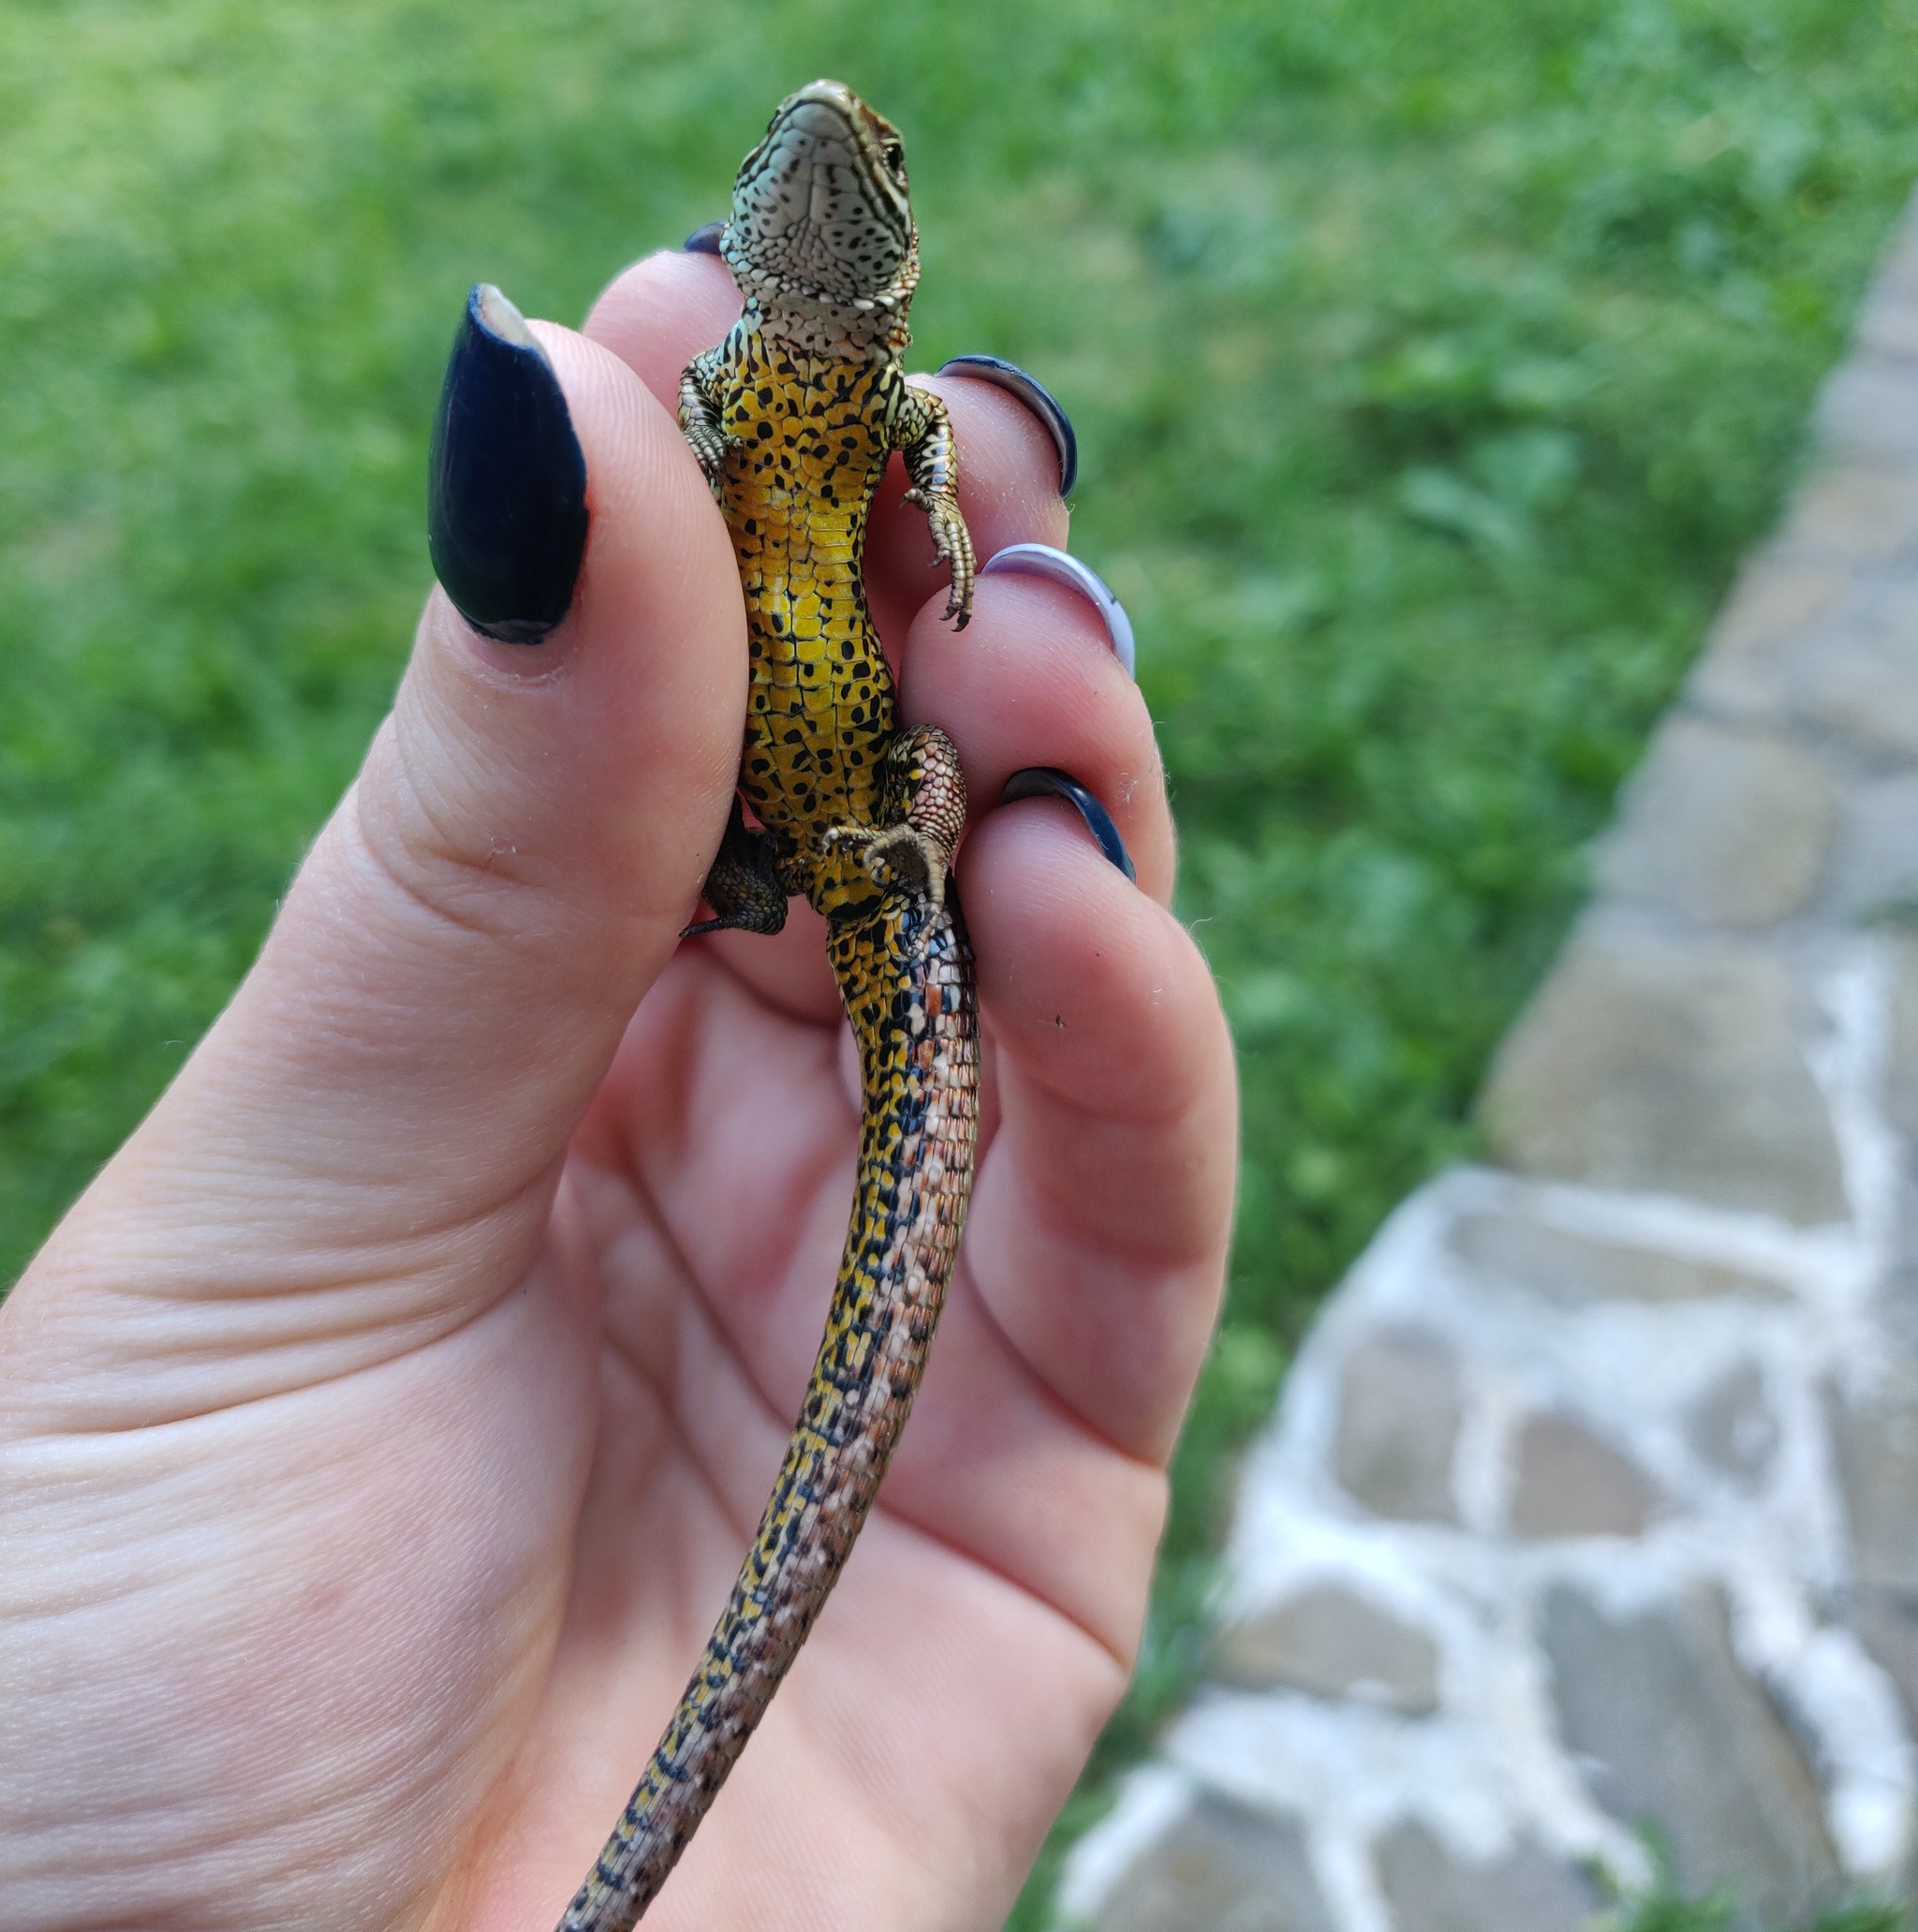 Does anyone know what type this is? - My, Lizard, Carpathians, Question, Help, Herpetology